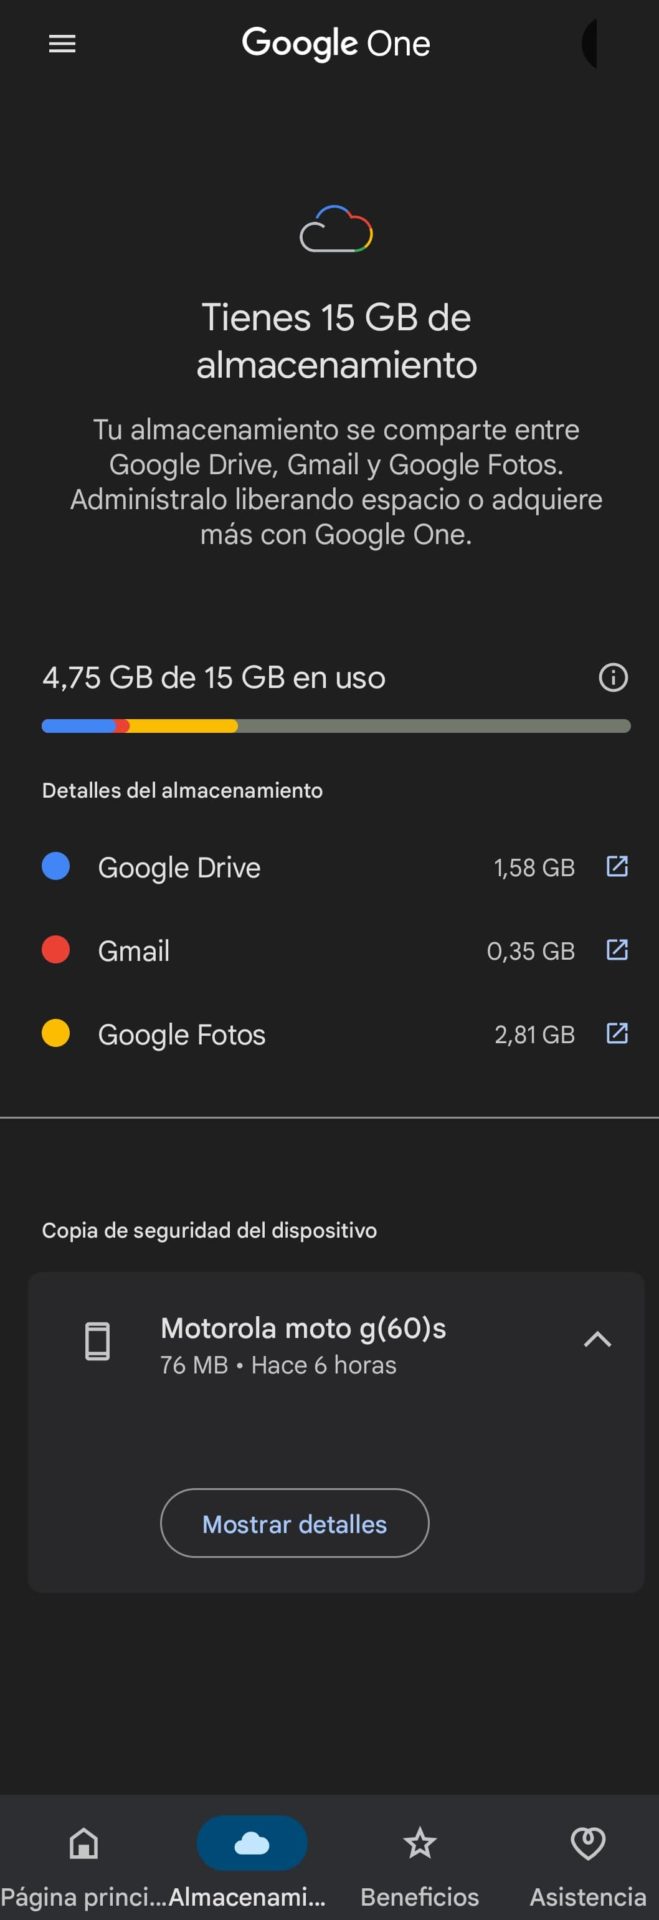 Backup Android